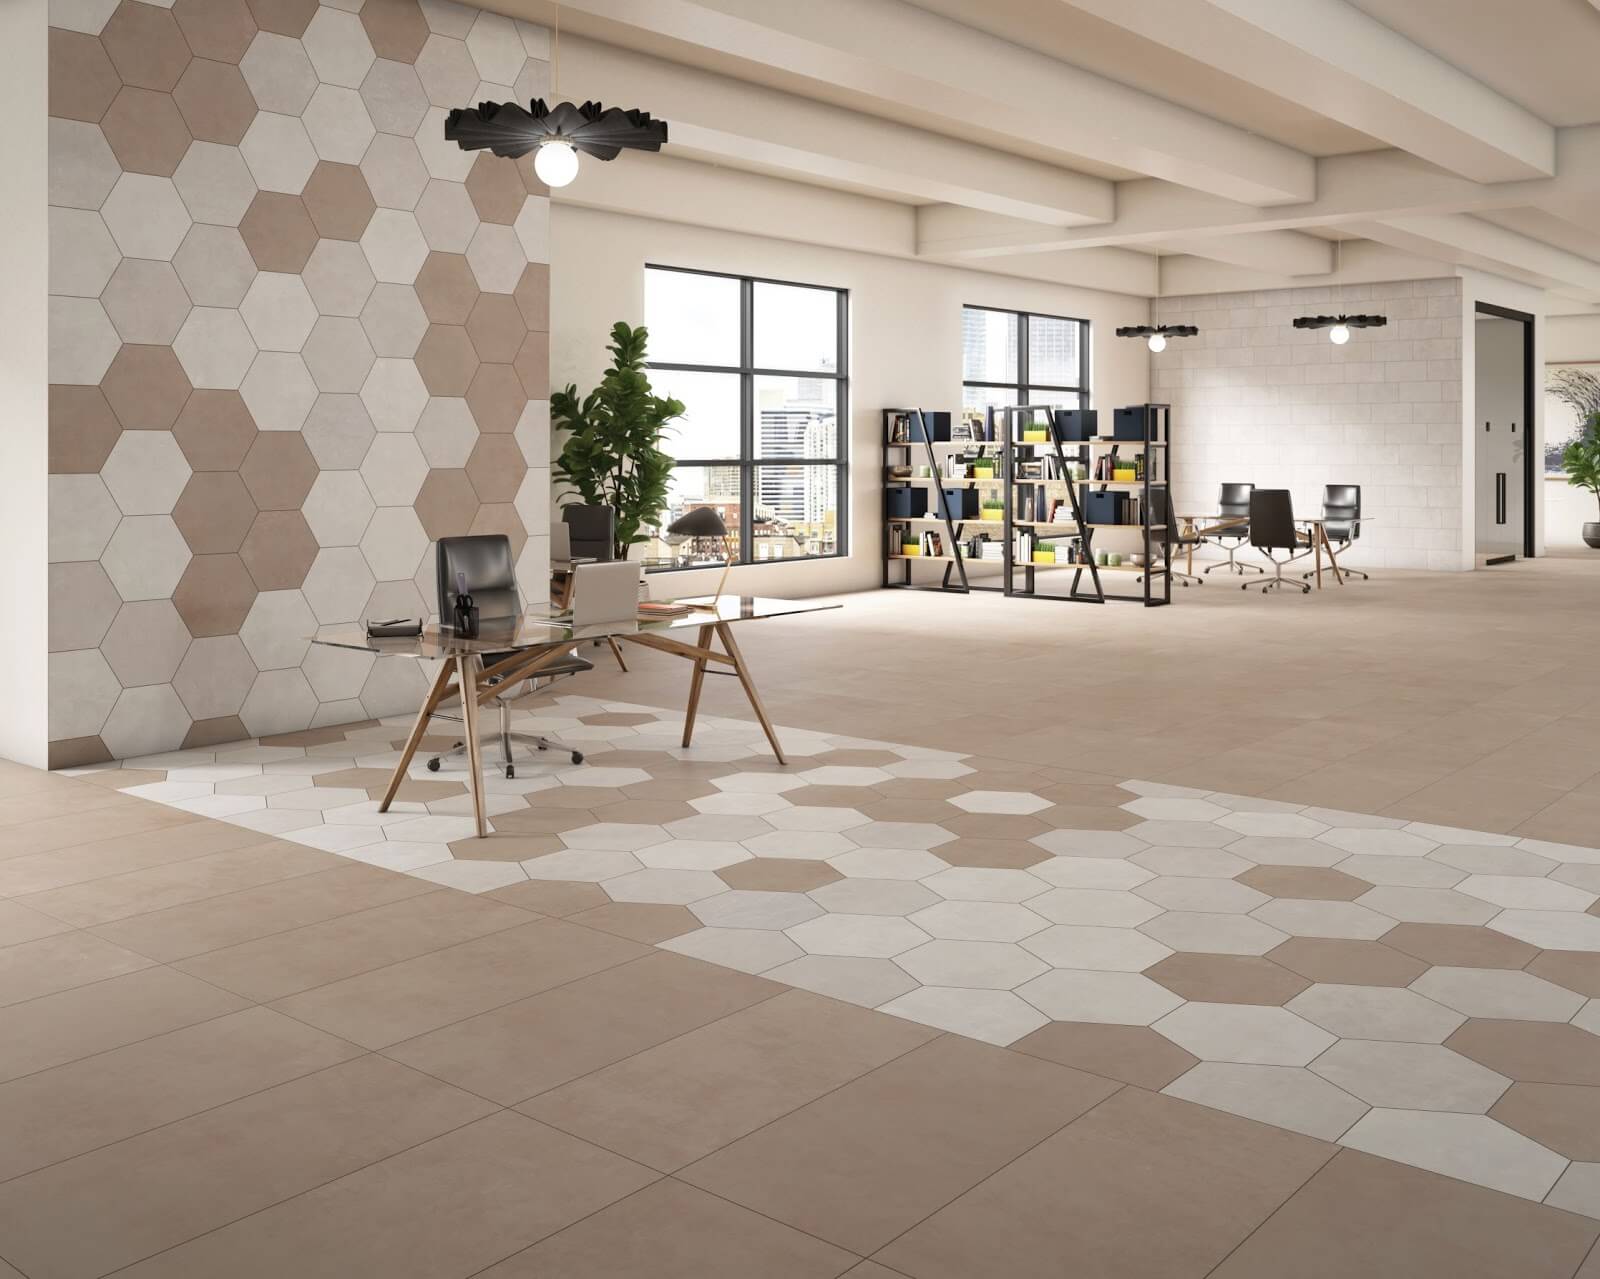 Large beige and white hexagon tiles